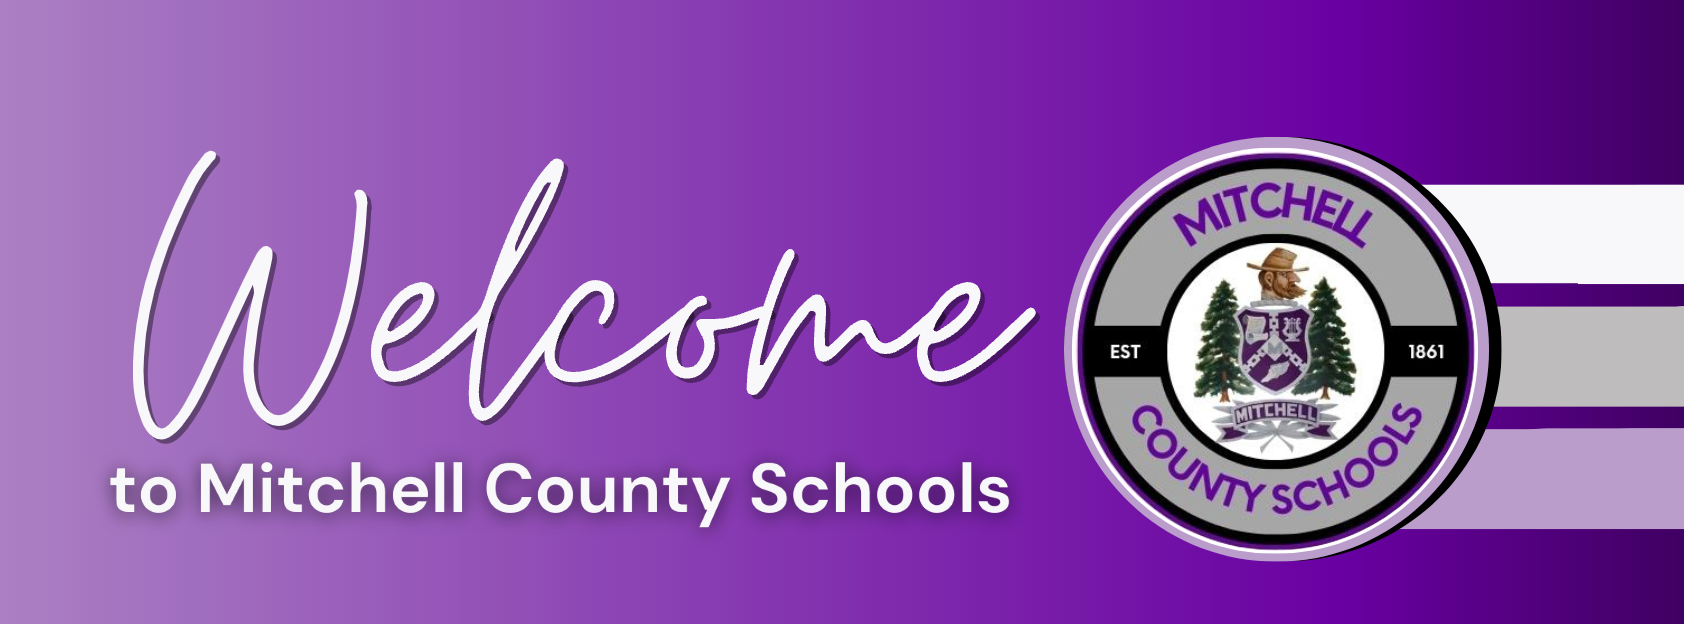 Mitchell County Schools Welcome Logo